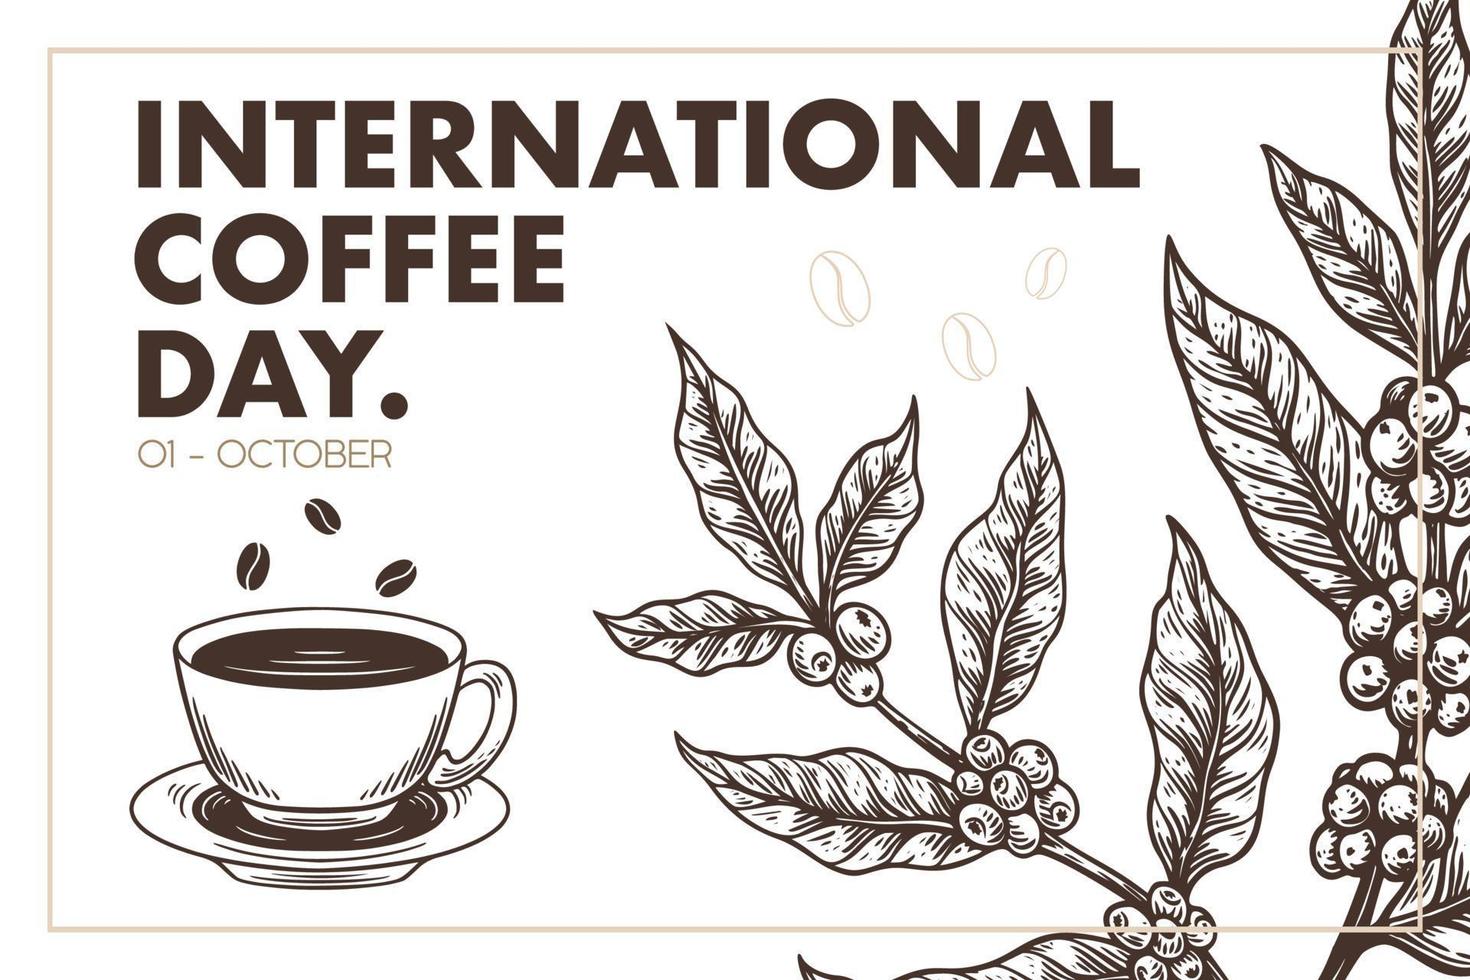 International coffee day design template with hand drawn style vector